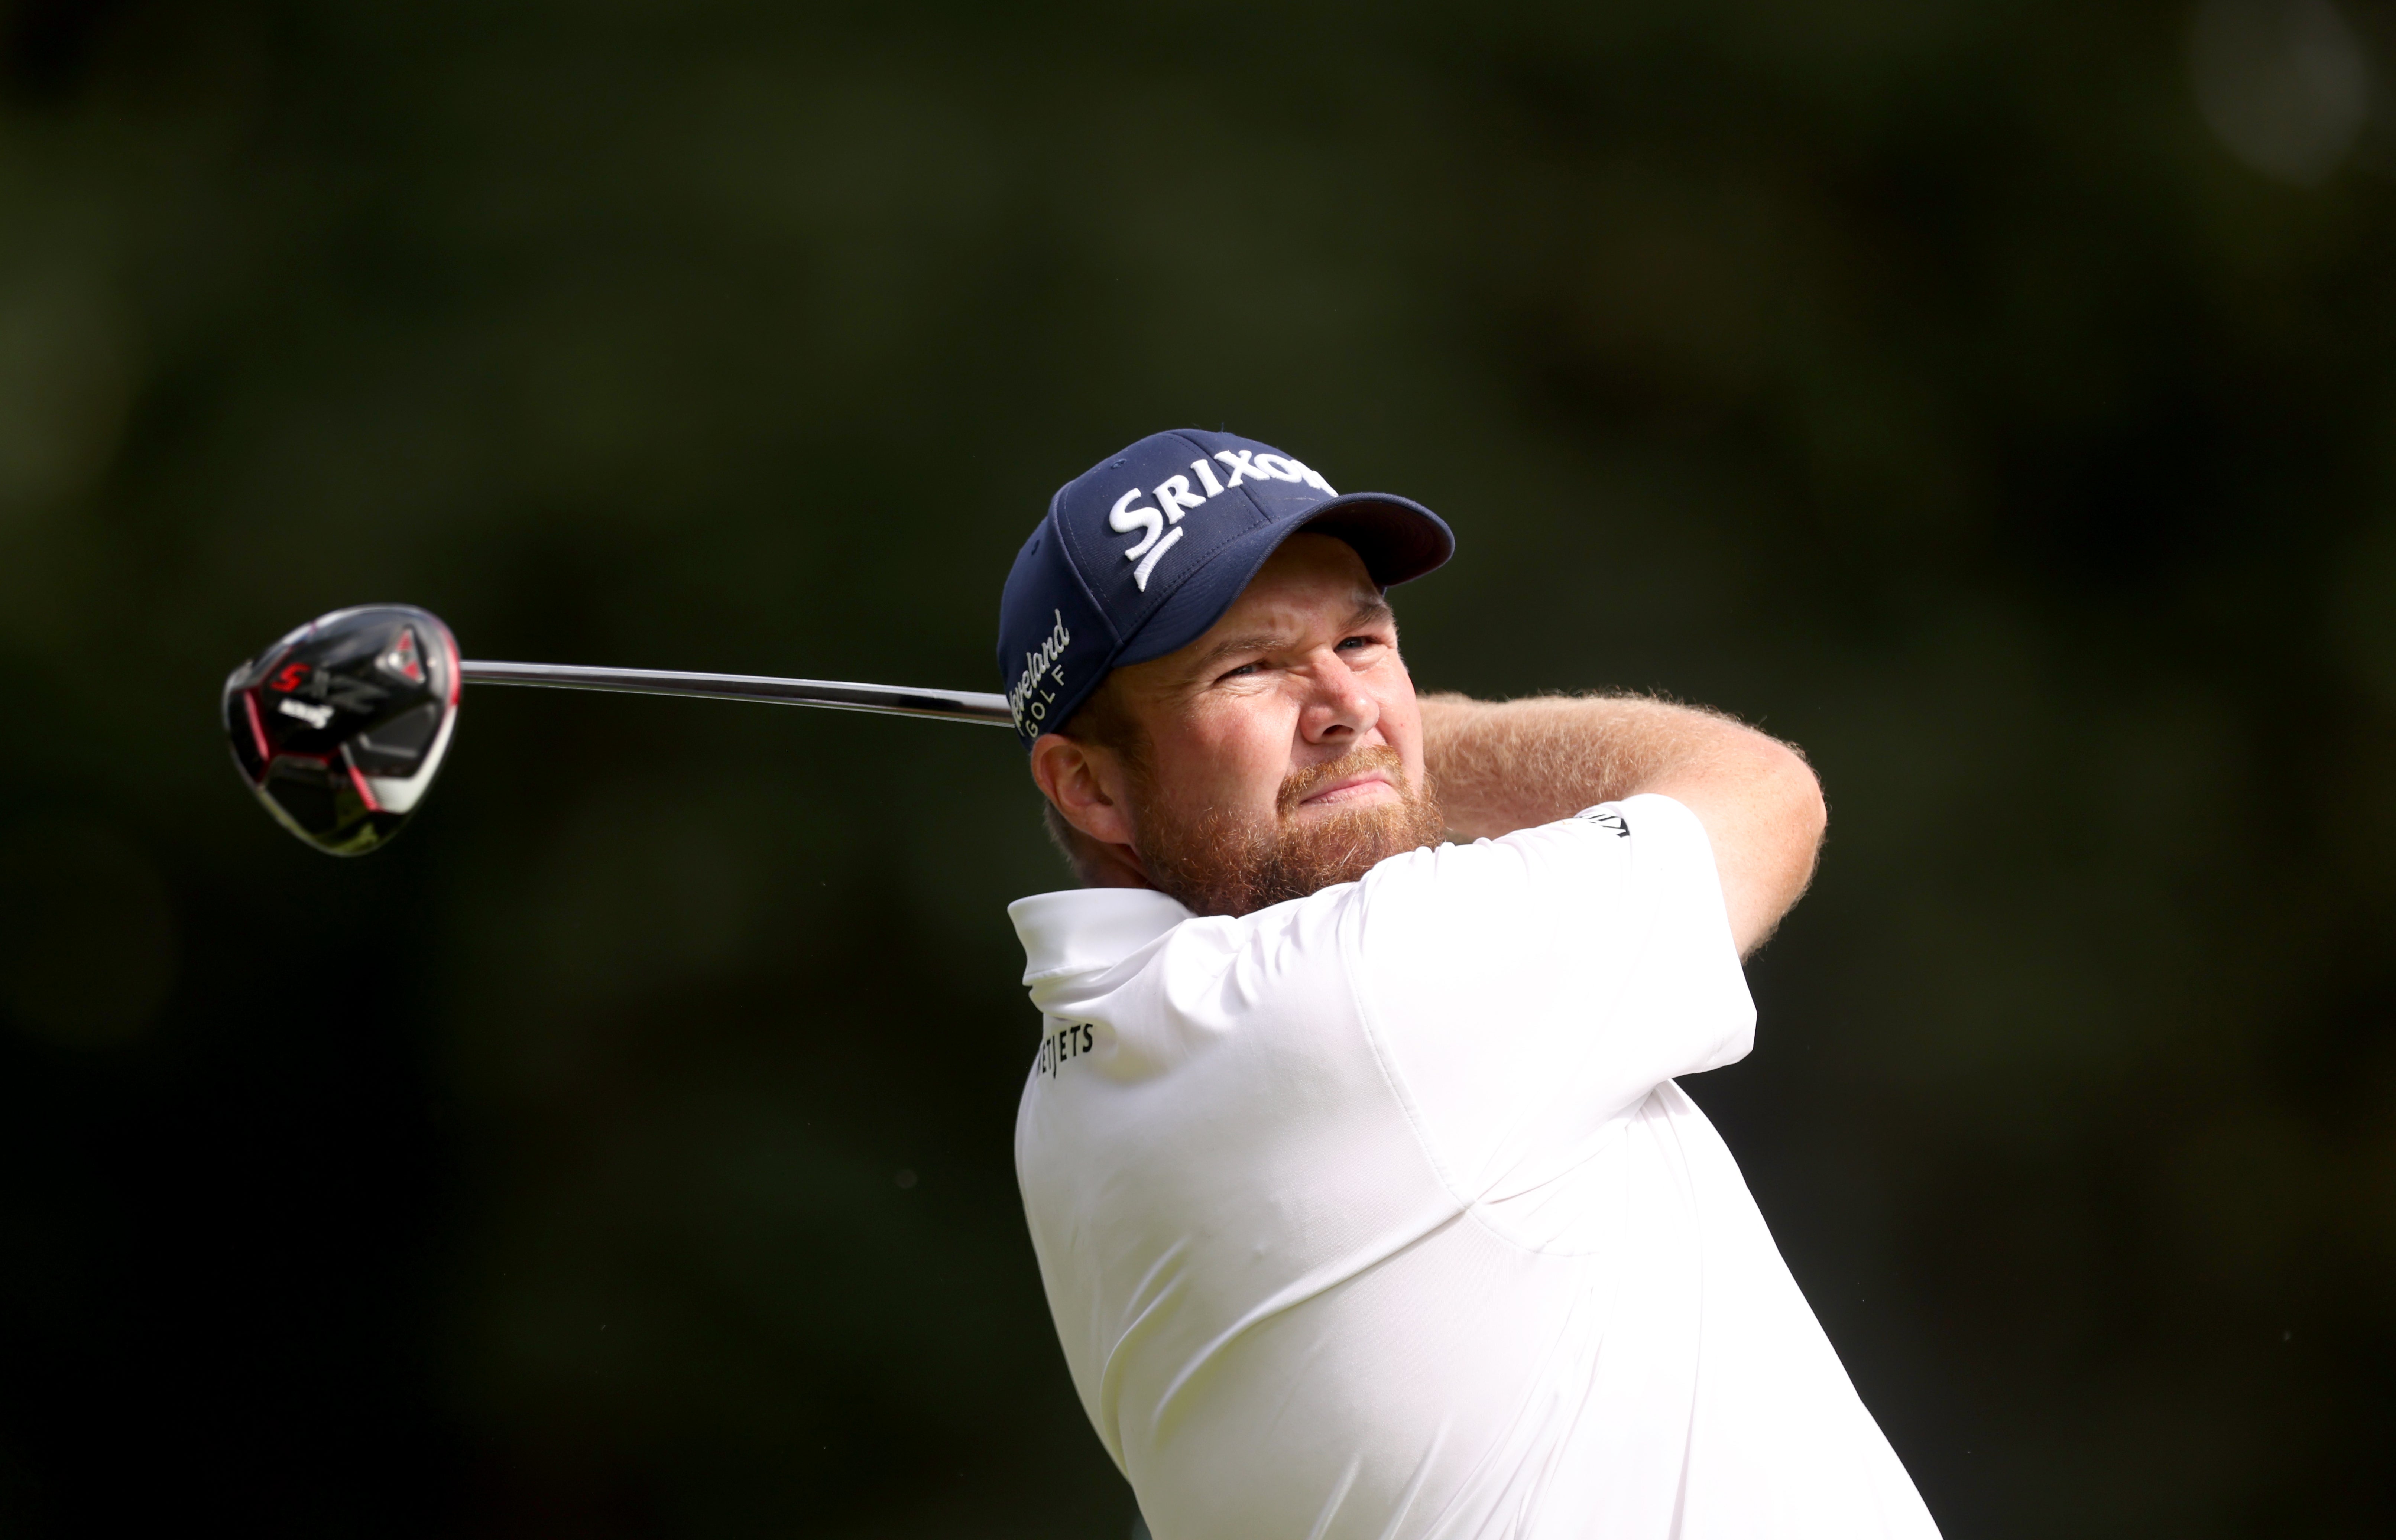 Shane Lowry will make his Ryder Cup debut at Whistling Straits (Steven Paston/PA)